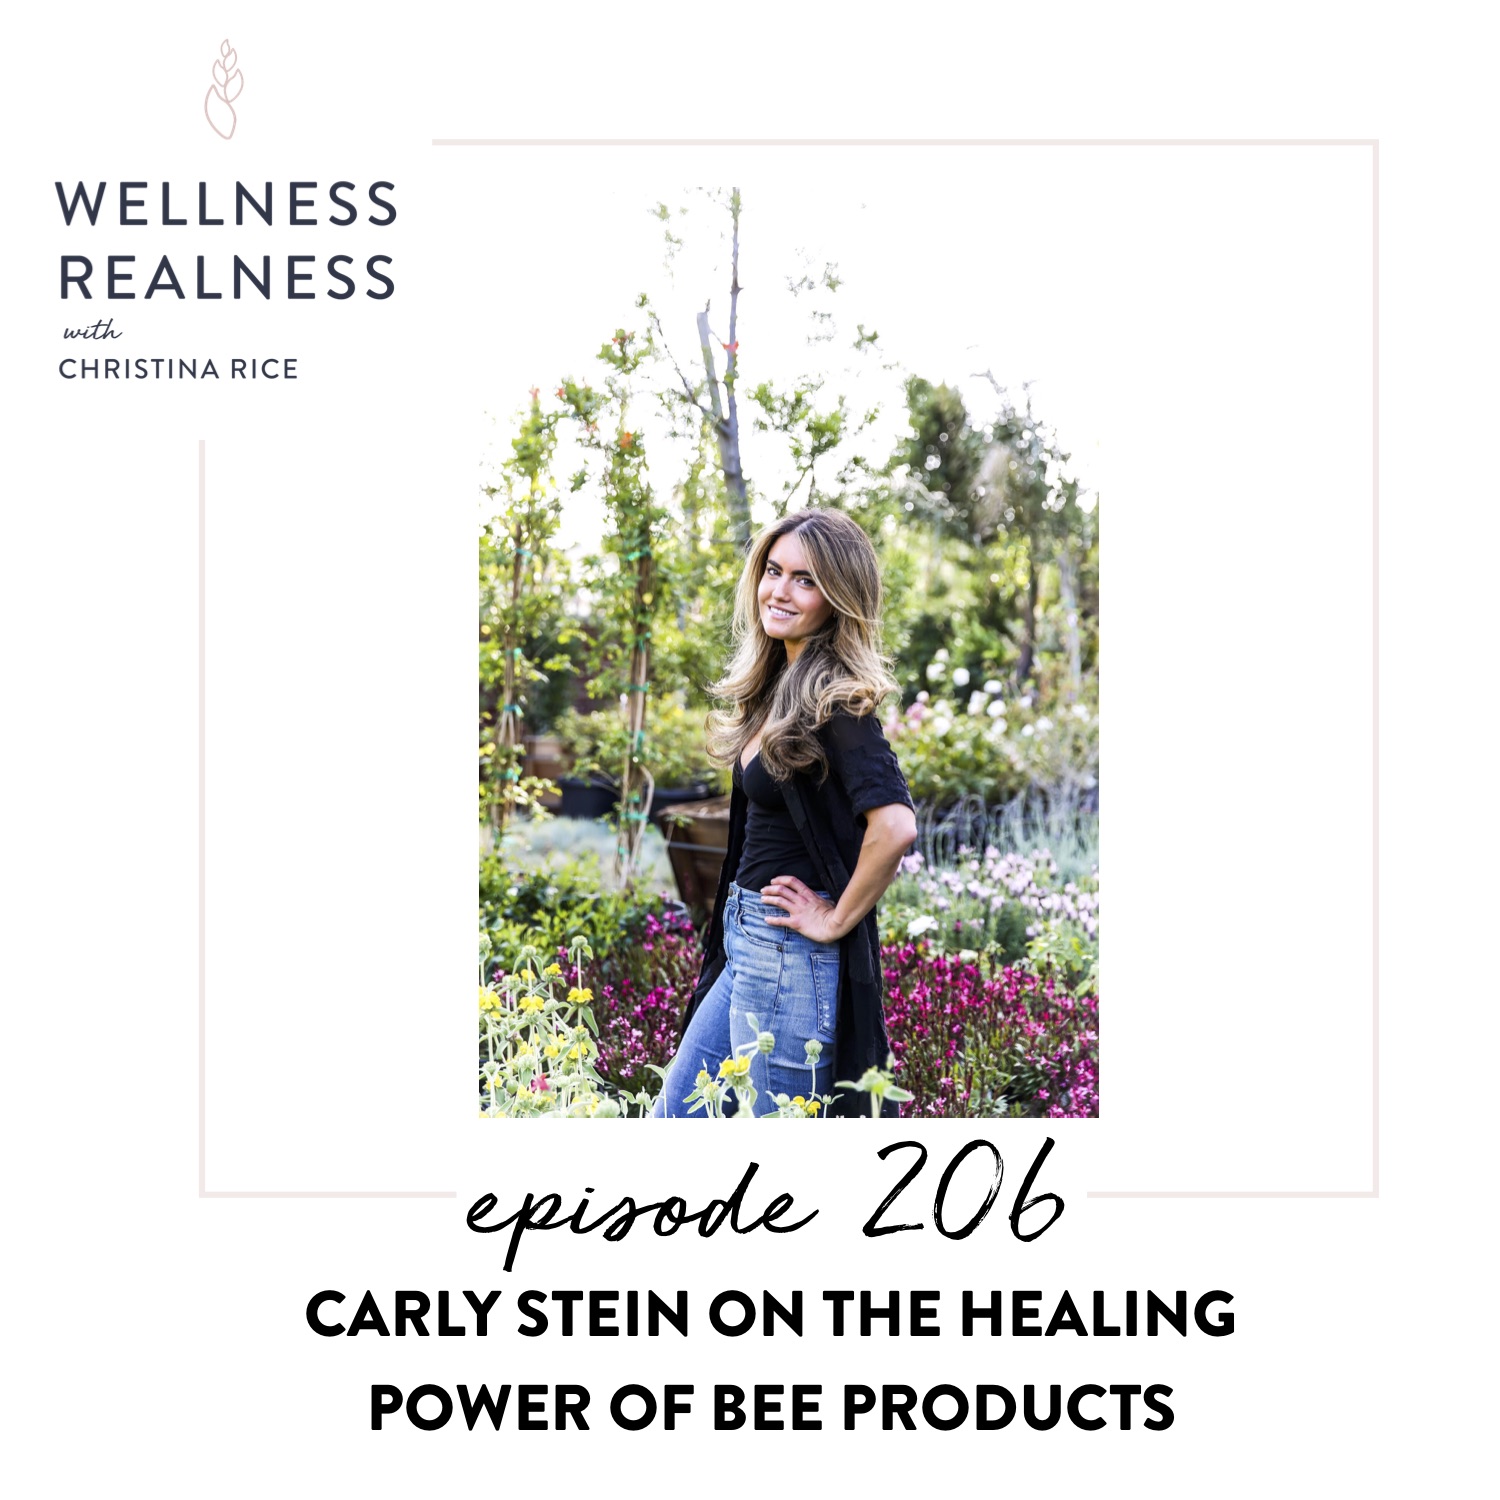 206: Carly Stein on the Healing Power of Bee Products